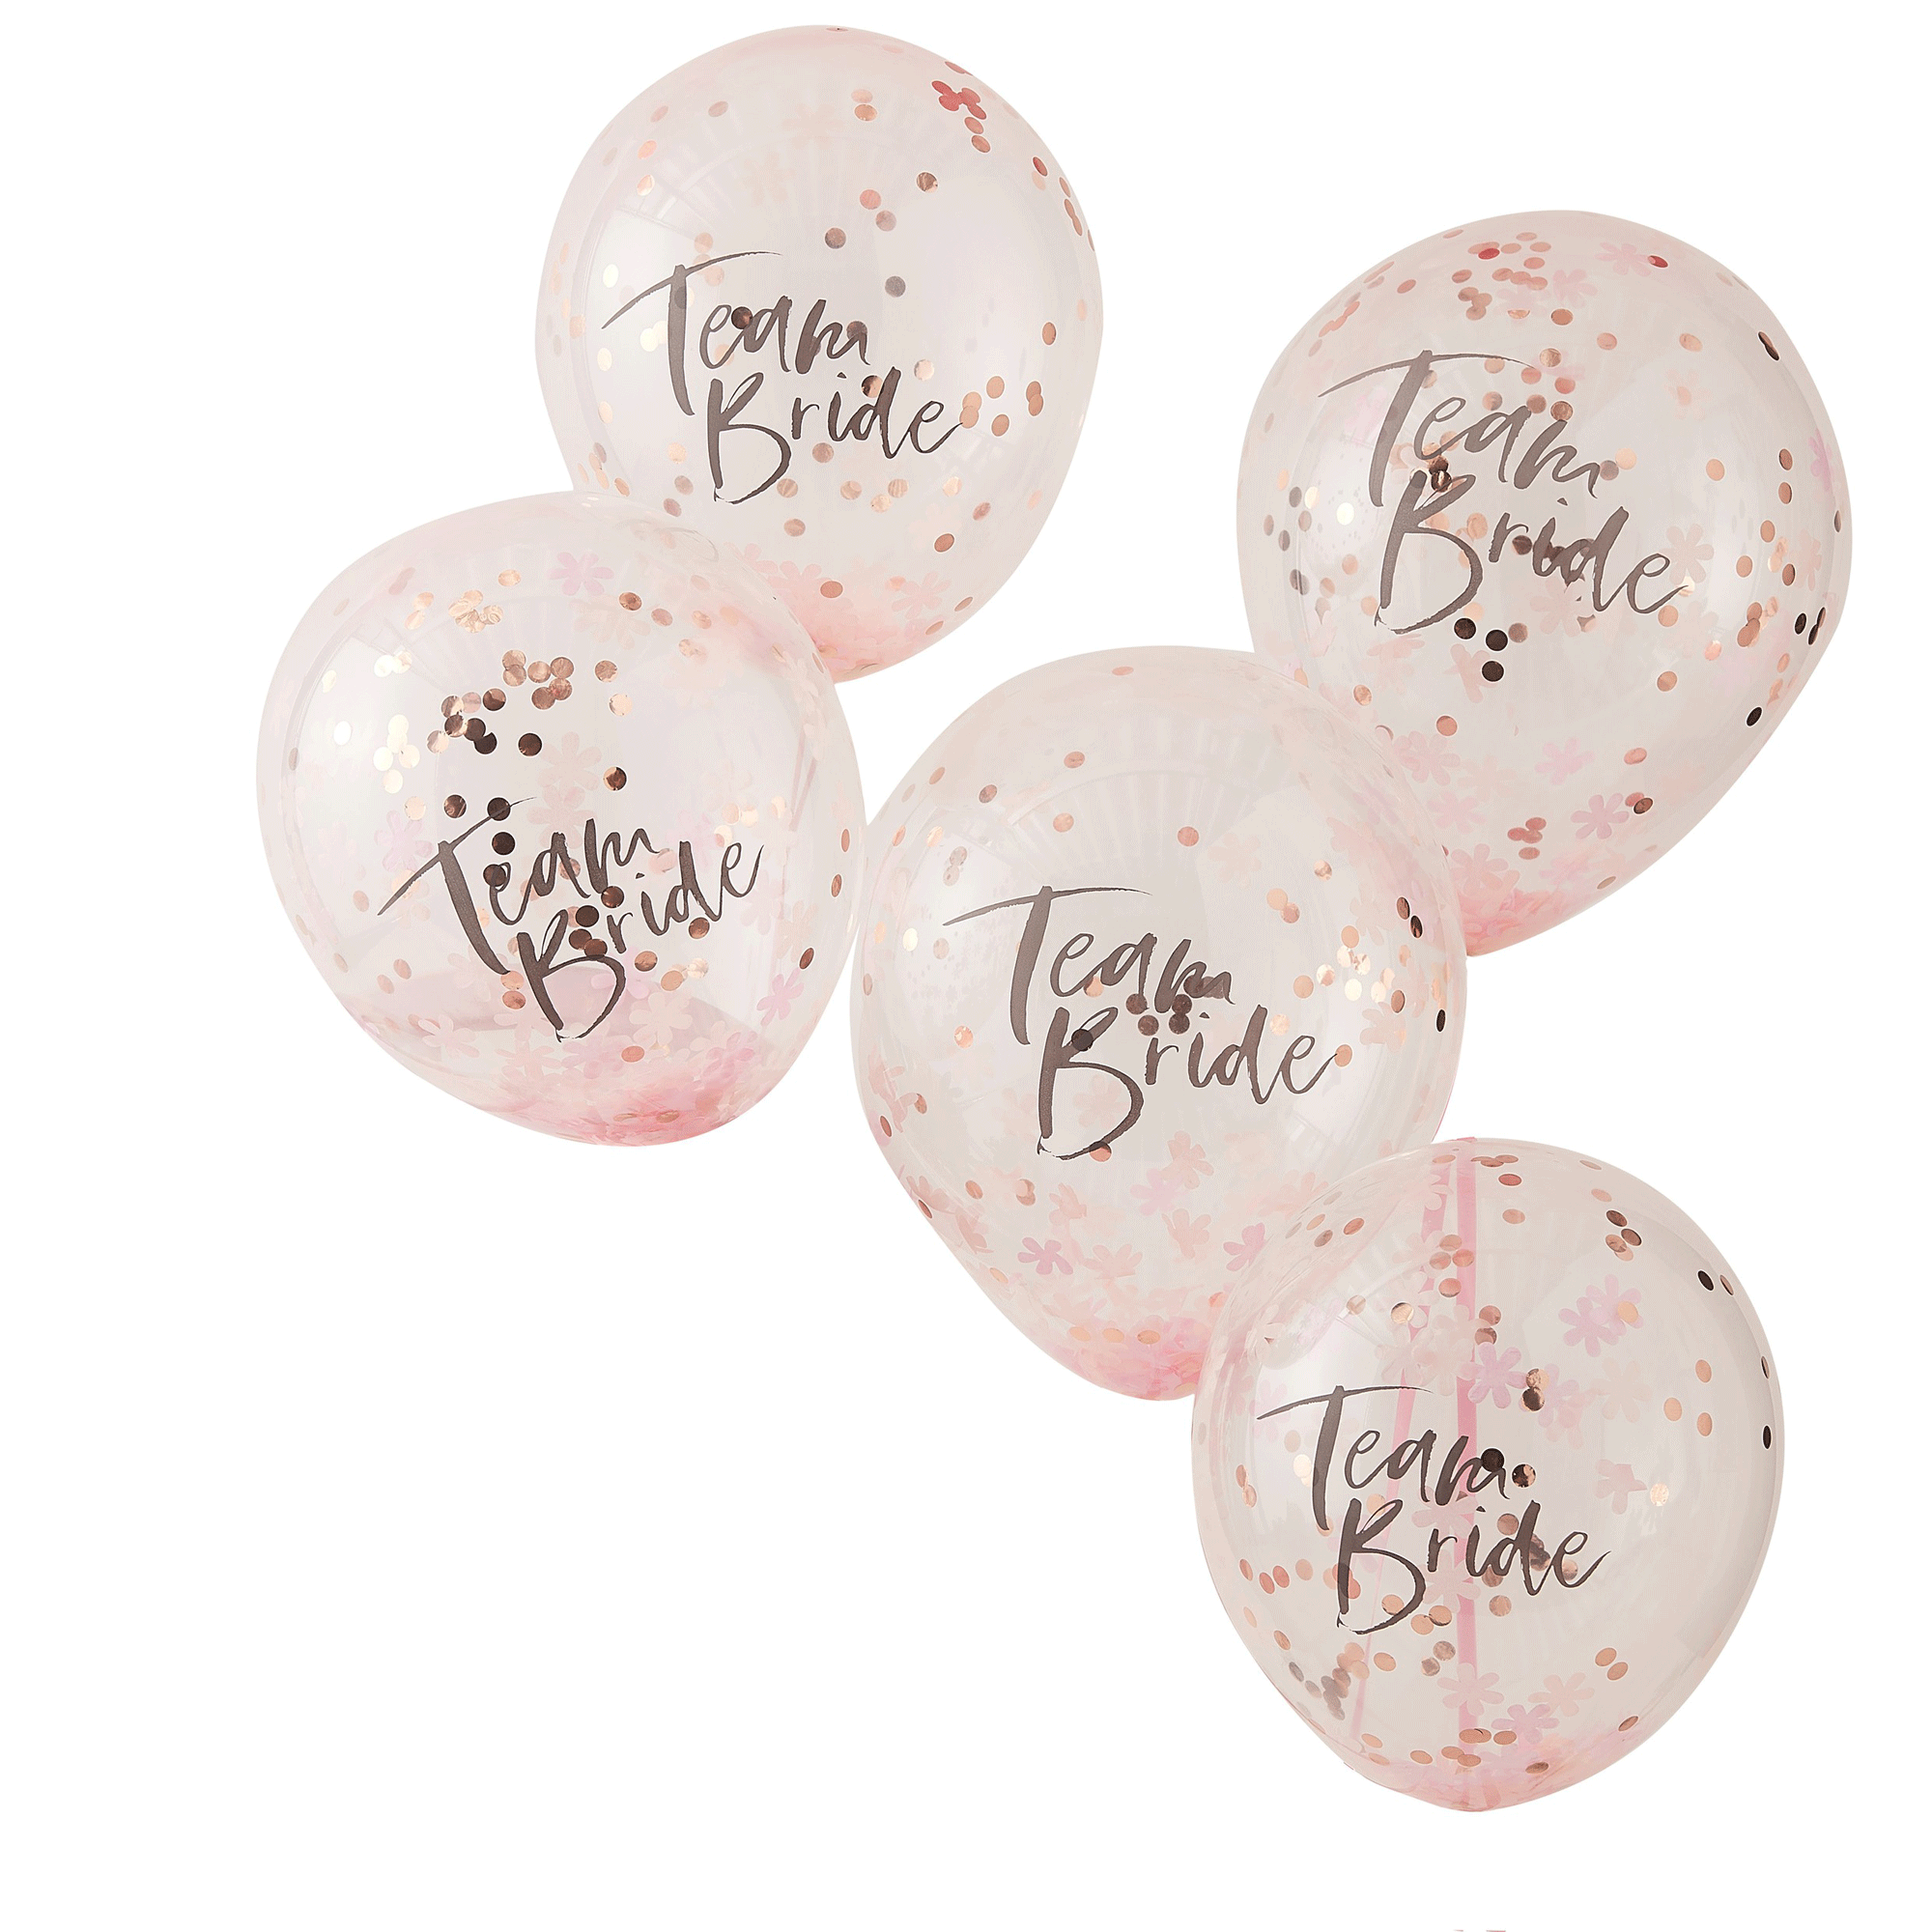 Team Bride Confetti Balloons (Pack of 5)